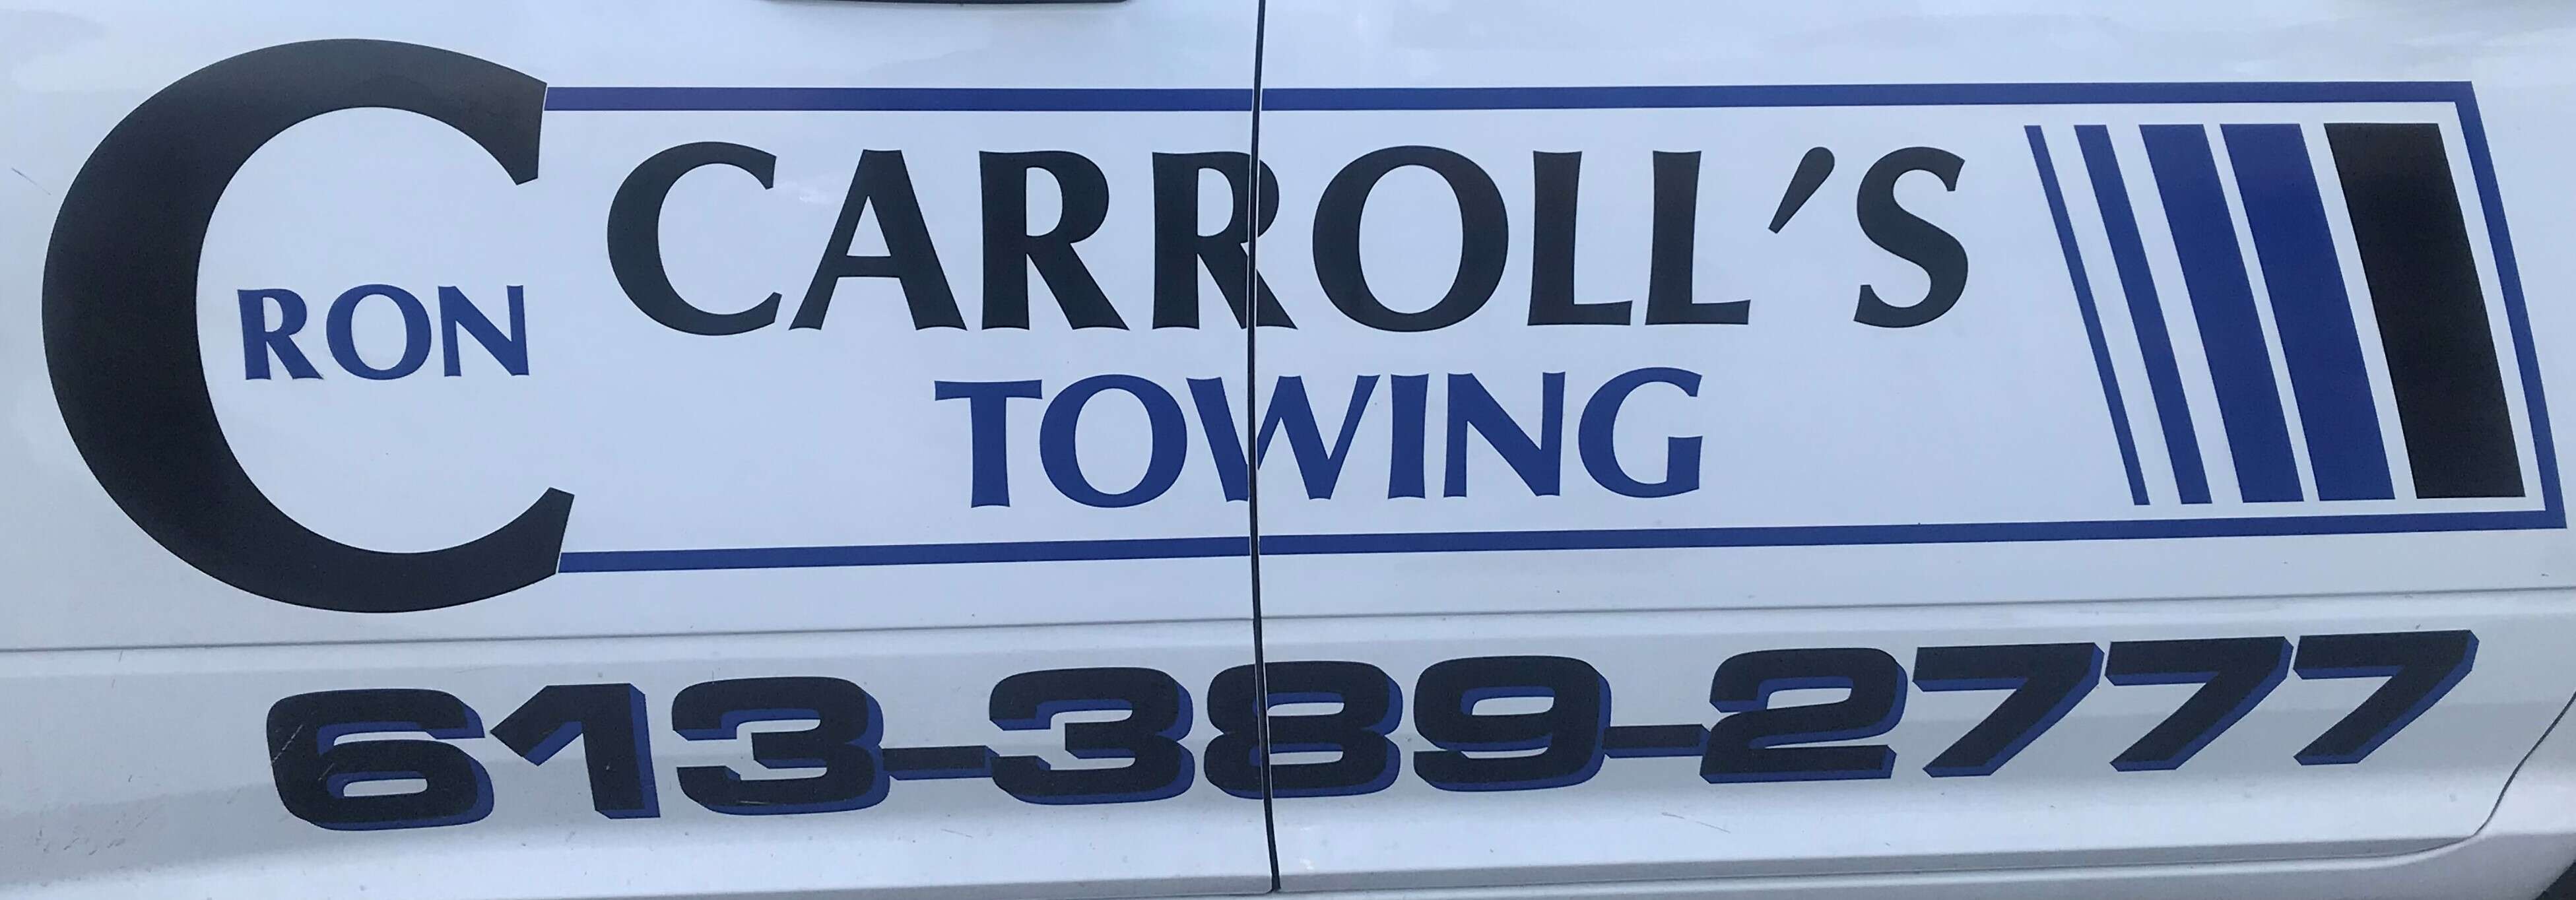 Ron Carroll's Towing